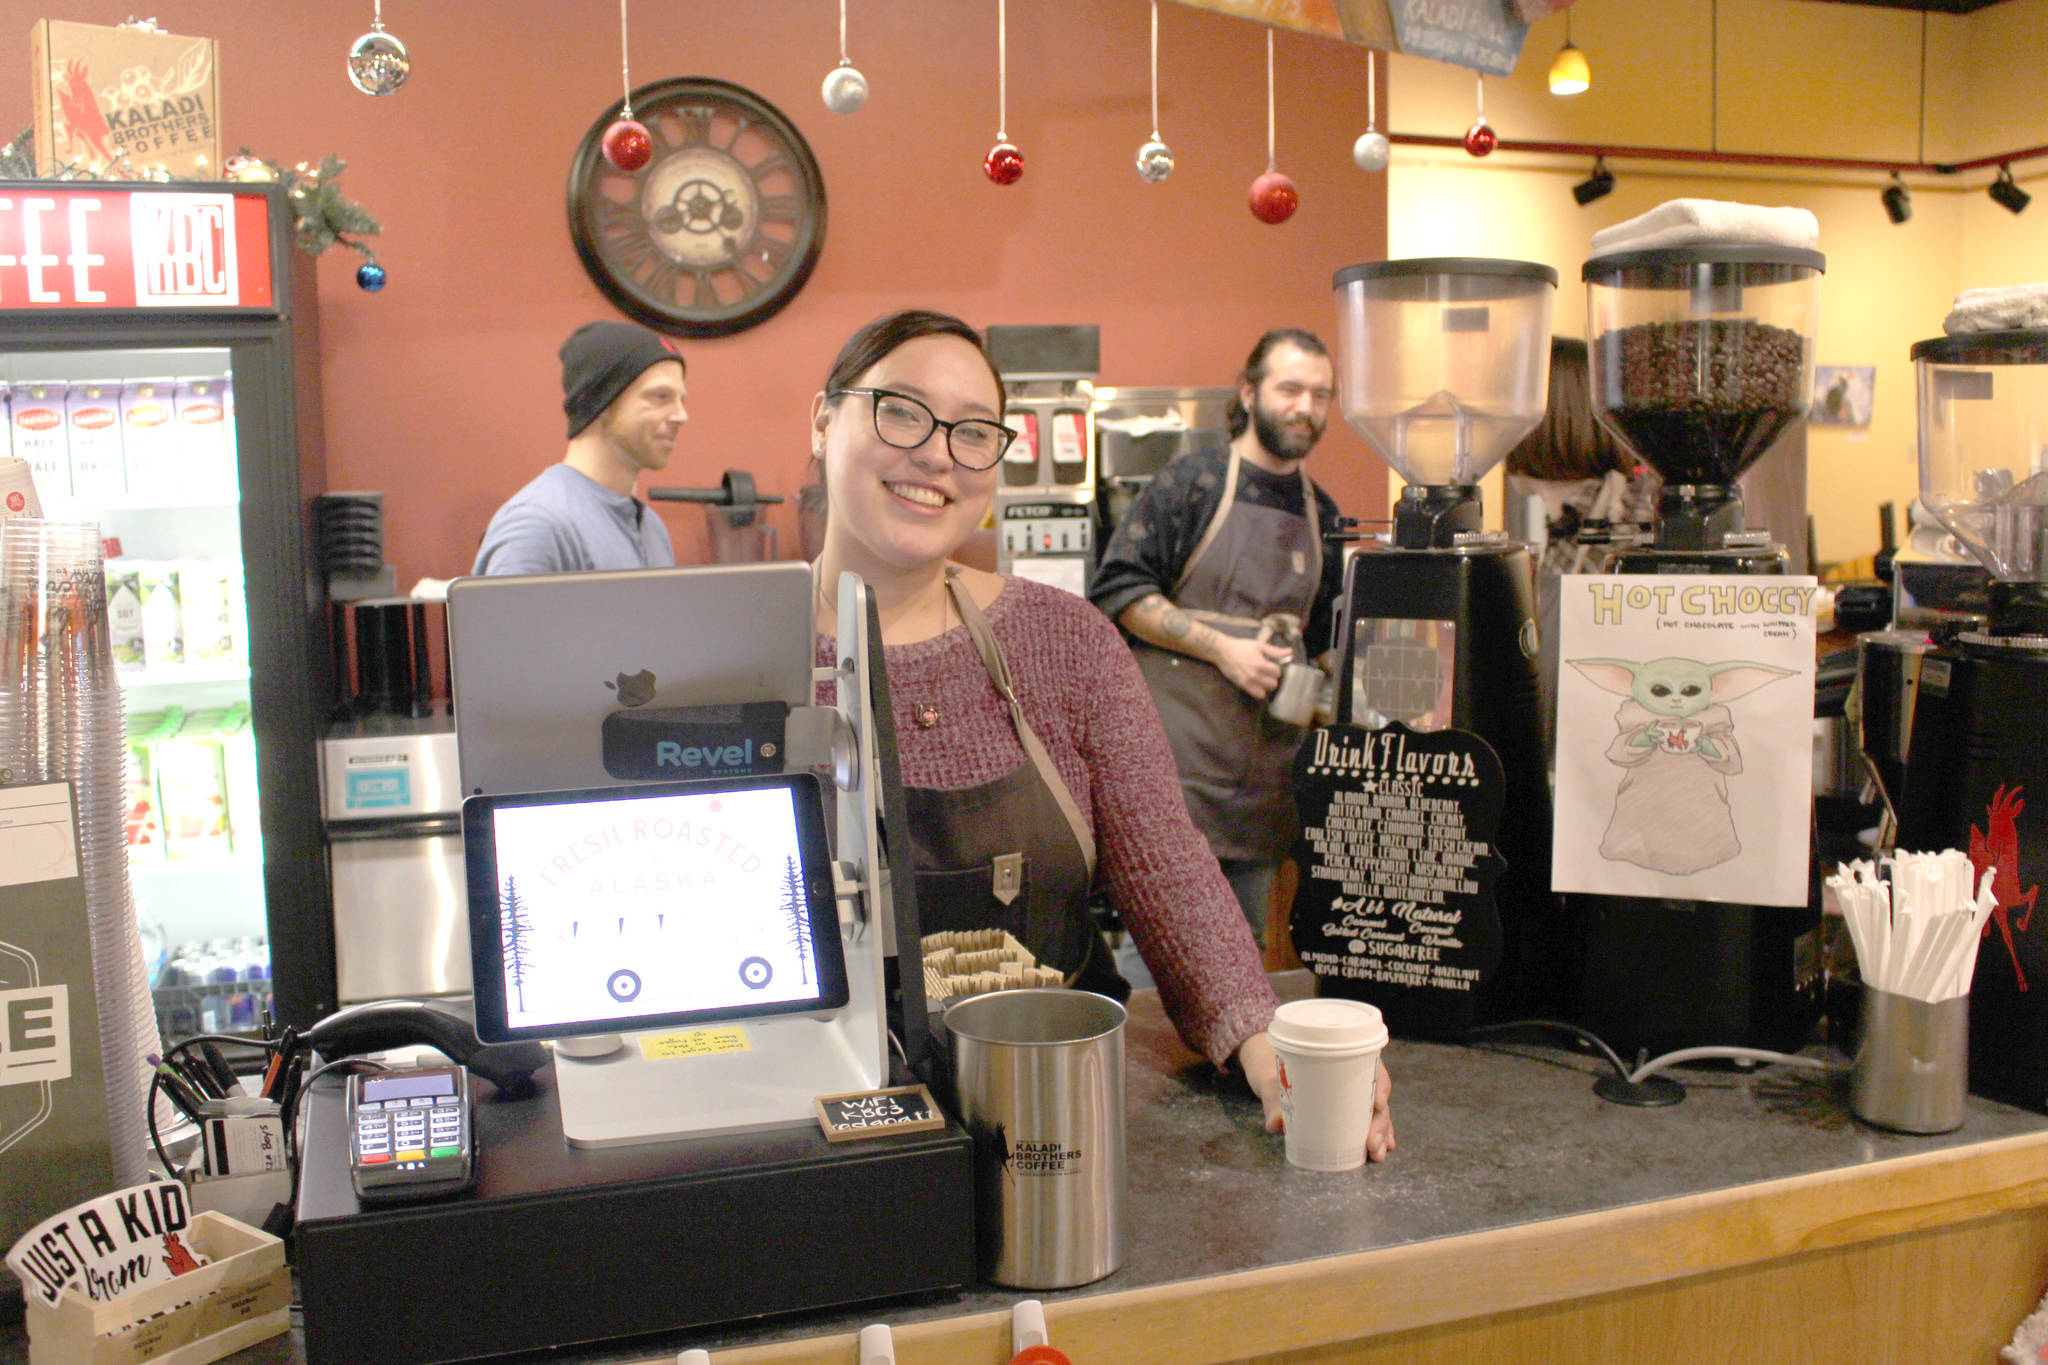 Shift leader Melanie Smith serves up a hazelnut latte at the Kaladi Brothers Coffee shop on Kobuk Street in Soldotna, Alaska on Jan. 1, 2020. Kaladi Brothers donated all of their proceeds from coffee sales on New Year’s Day to the Students in Transition program, which provides resources to homeless students on the Kenai Peninsula. (Photo by Brian Mazurek/Peninsula Clarion)